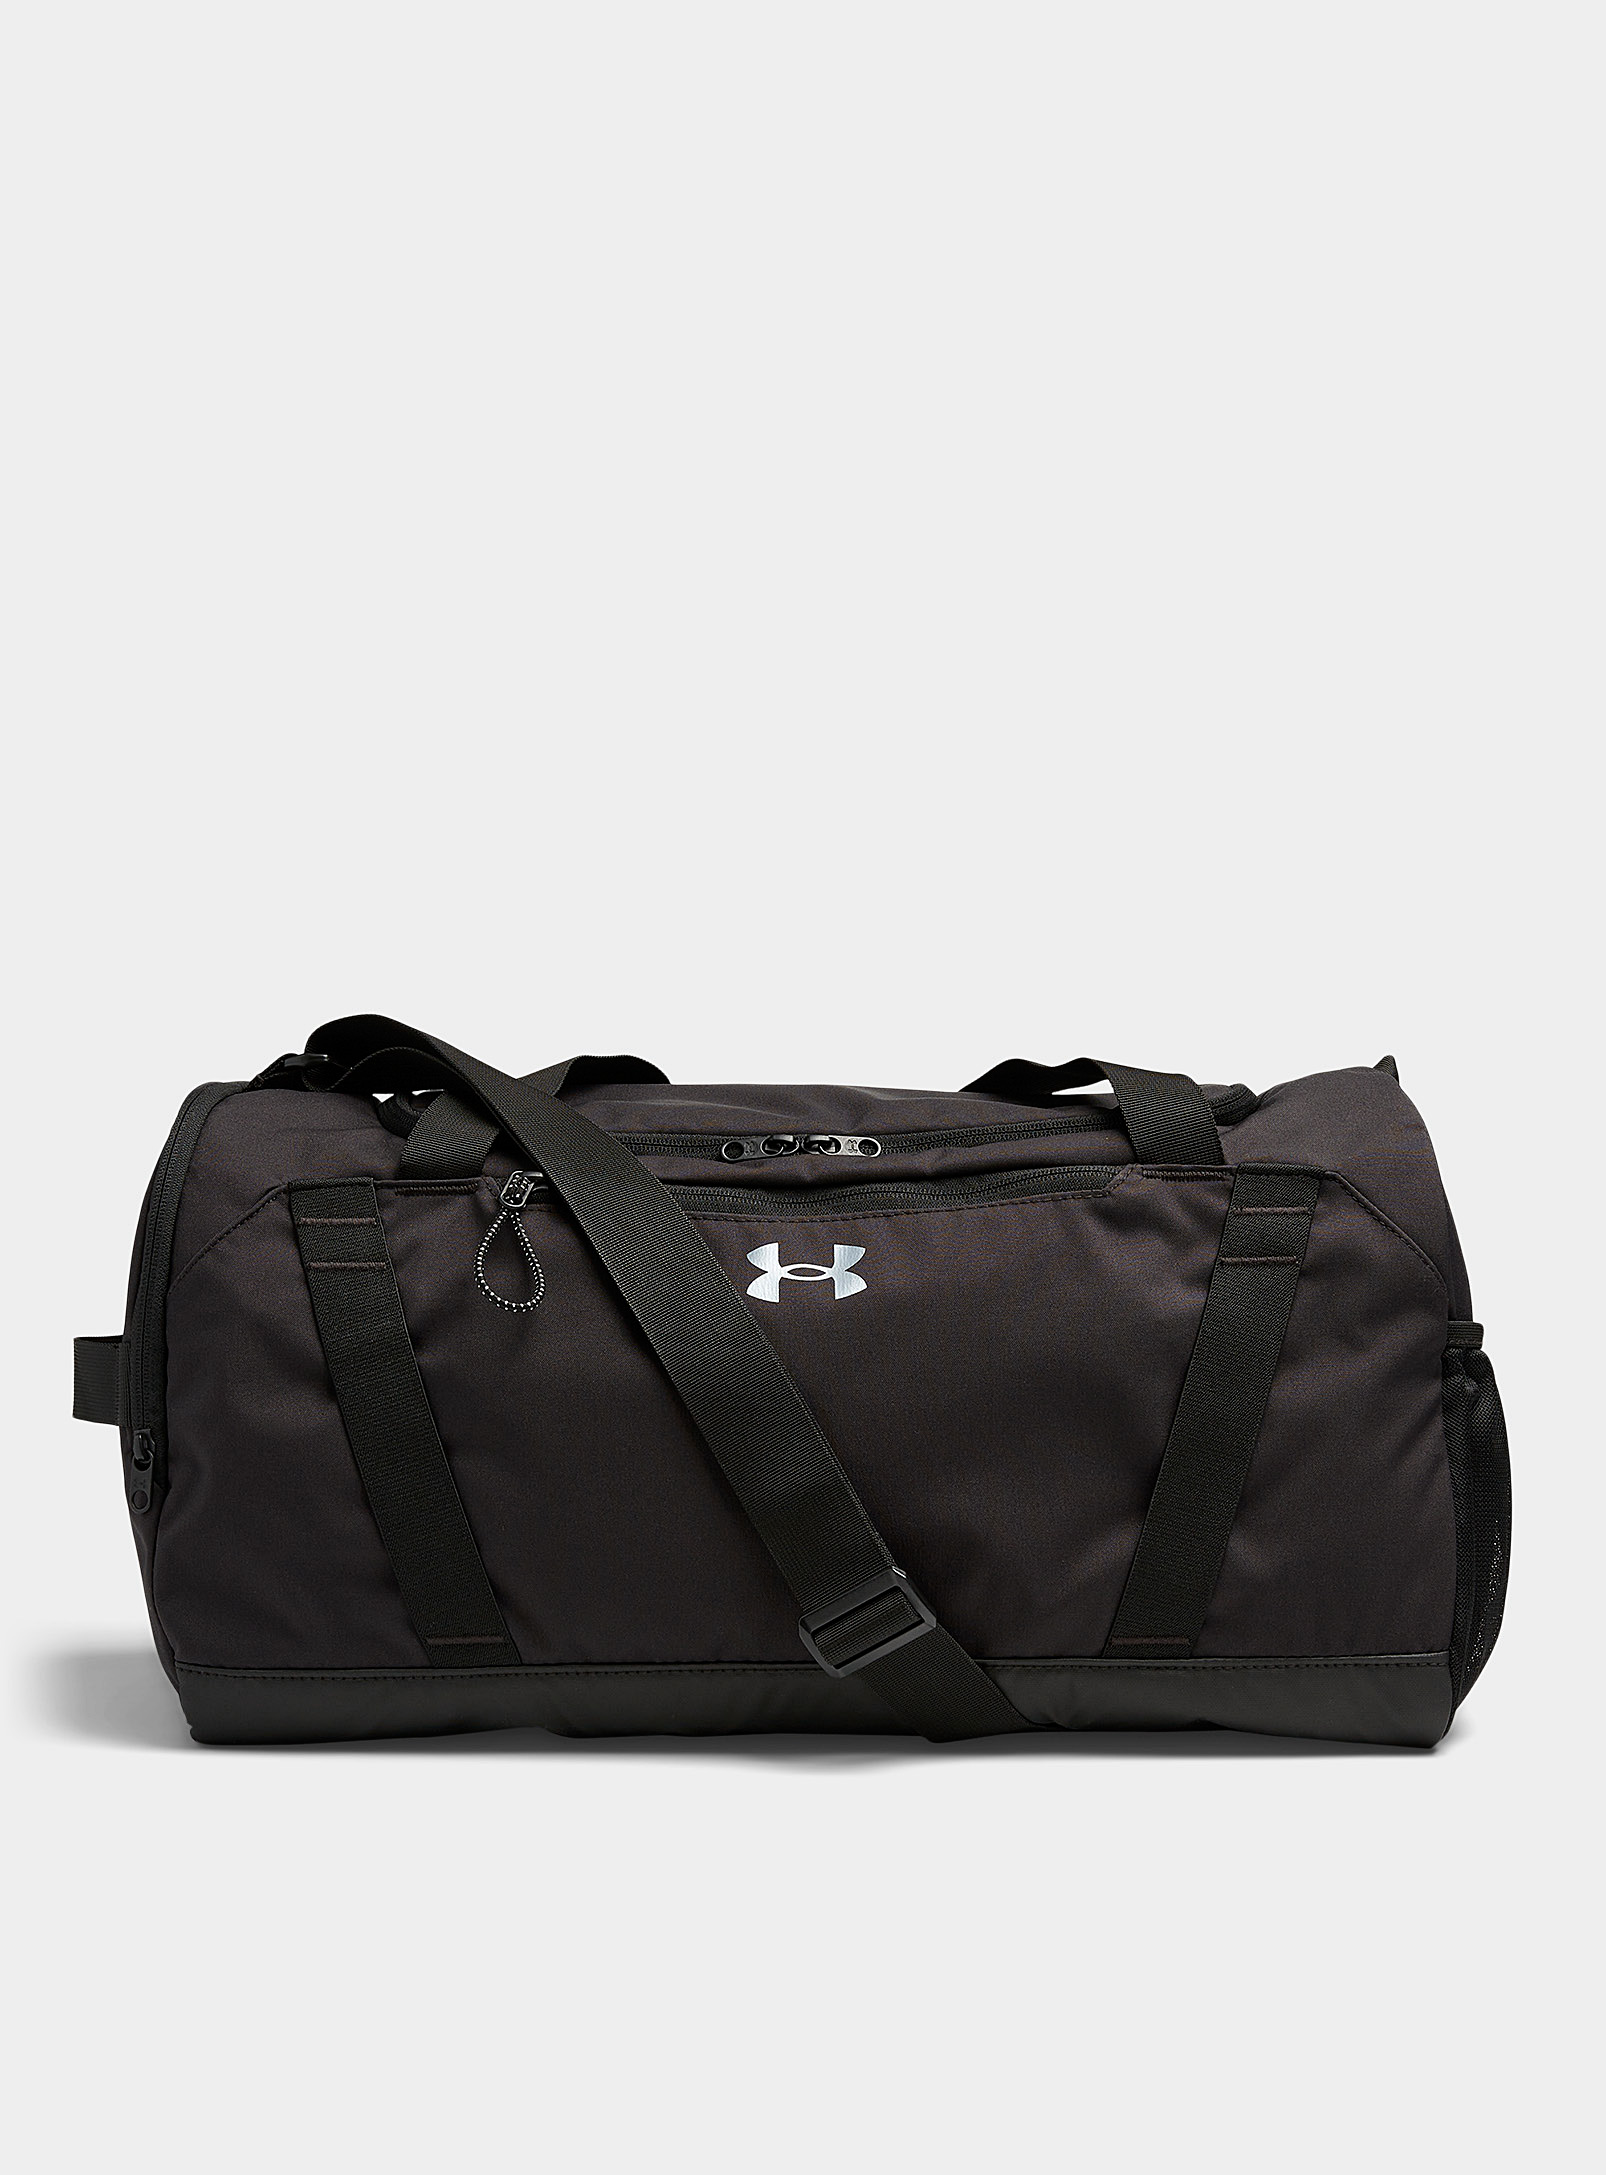 Under Armour Undeniable Gym Bag In Black